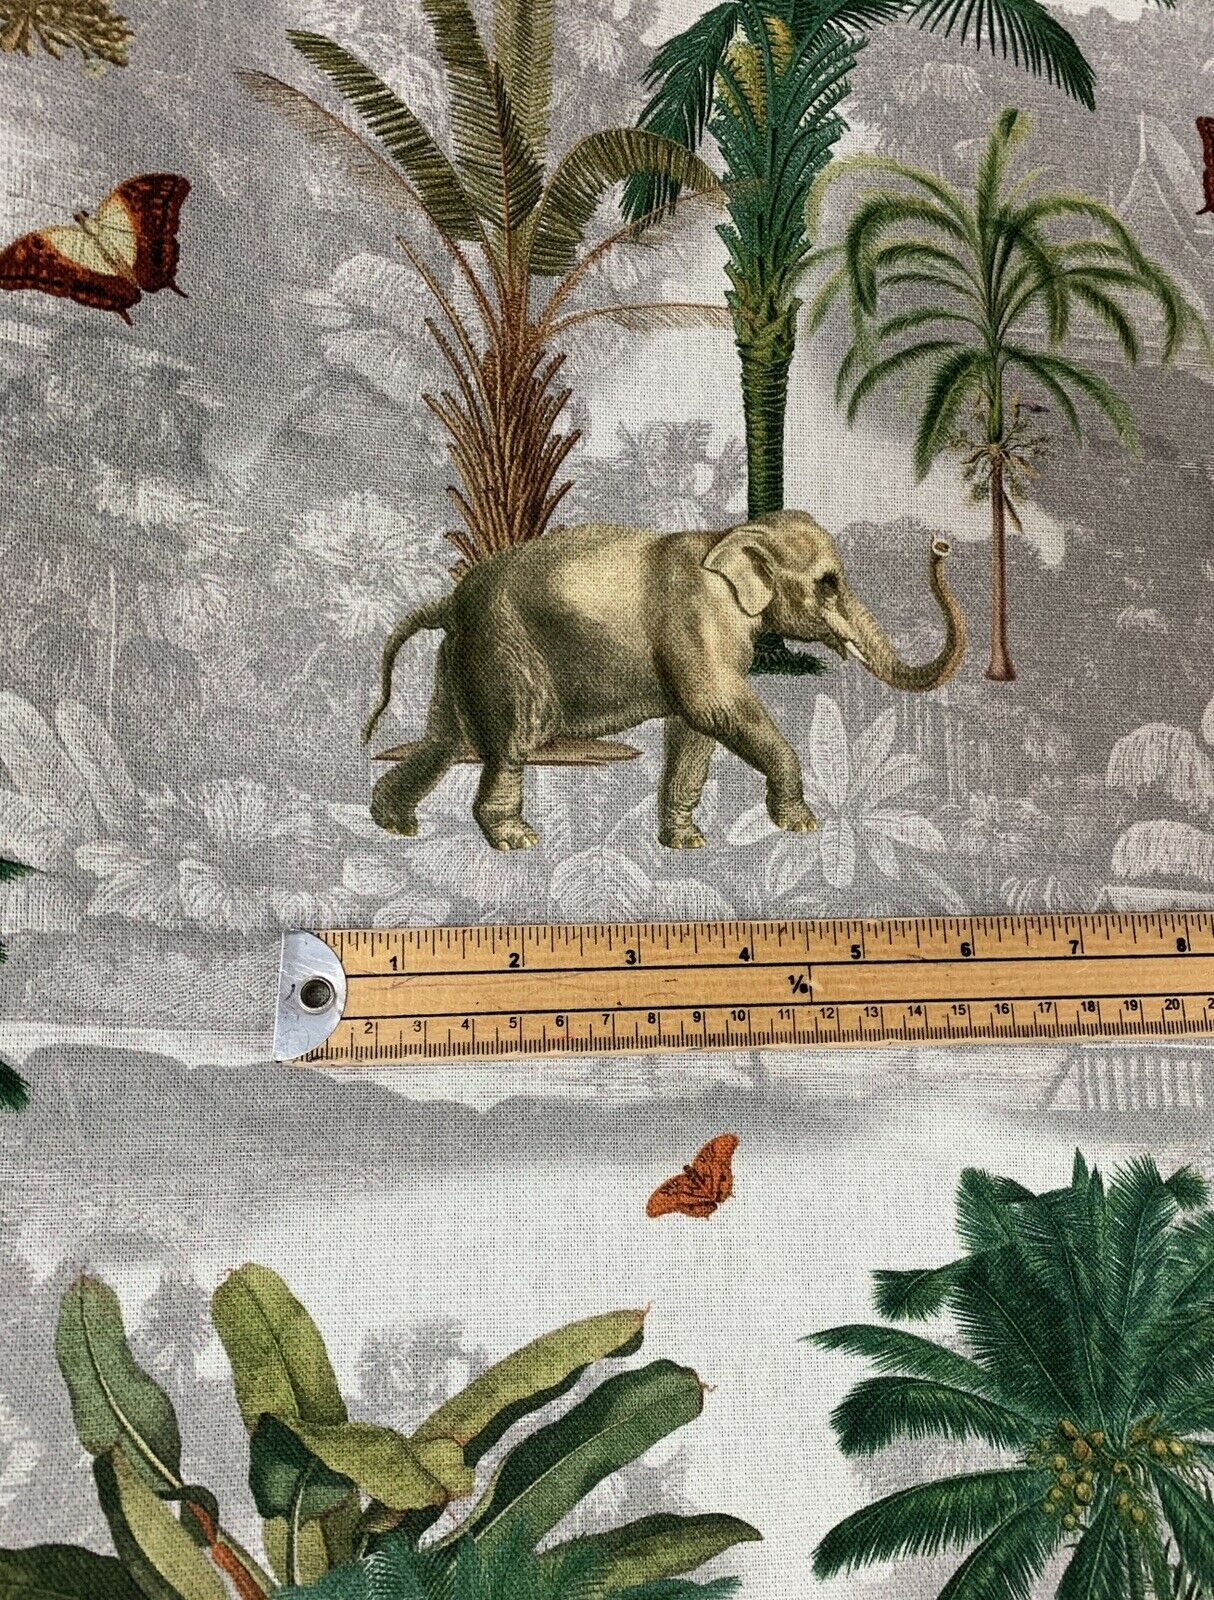 Safari Animals fabric by the meter Grey Cotton Sewing Material Green Palm Tree Elephant Zebra Panther Flamingo Pattern Textile for cushions curtains blinds